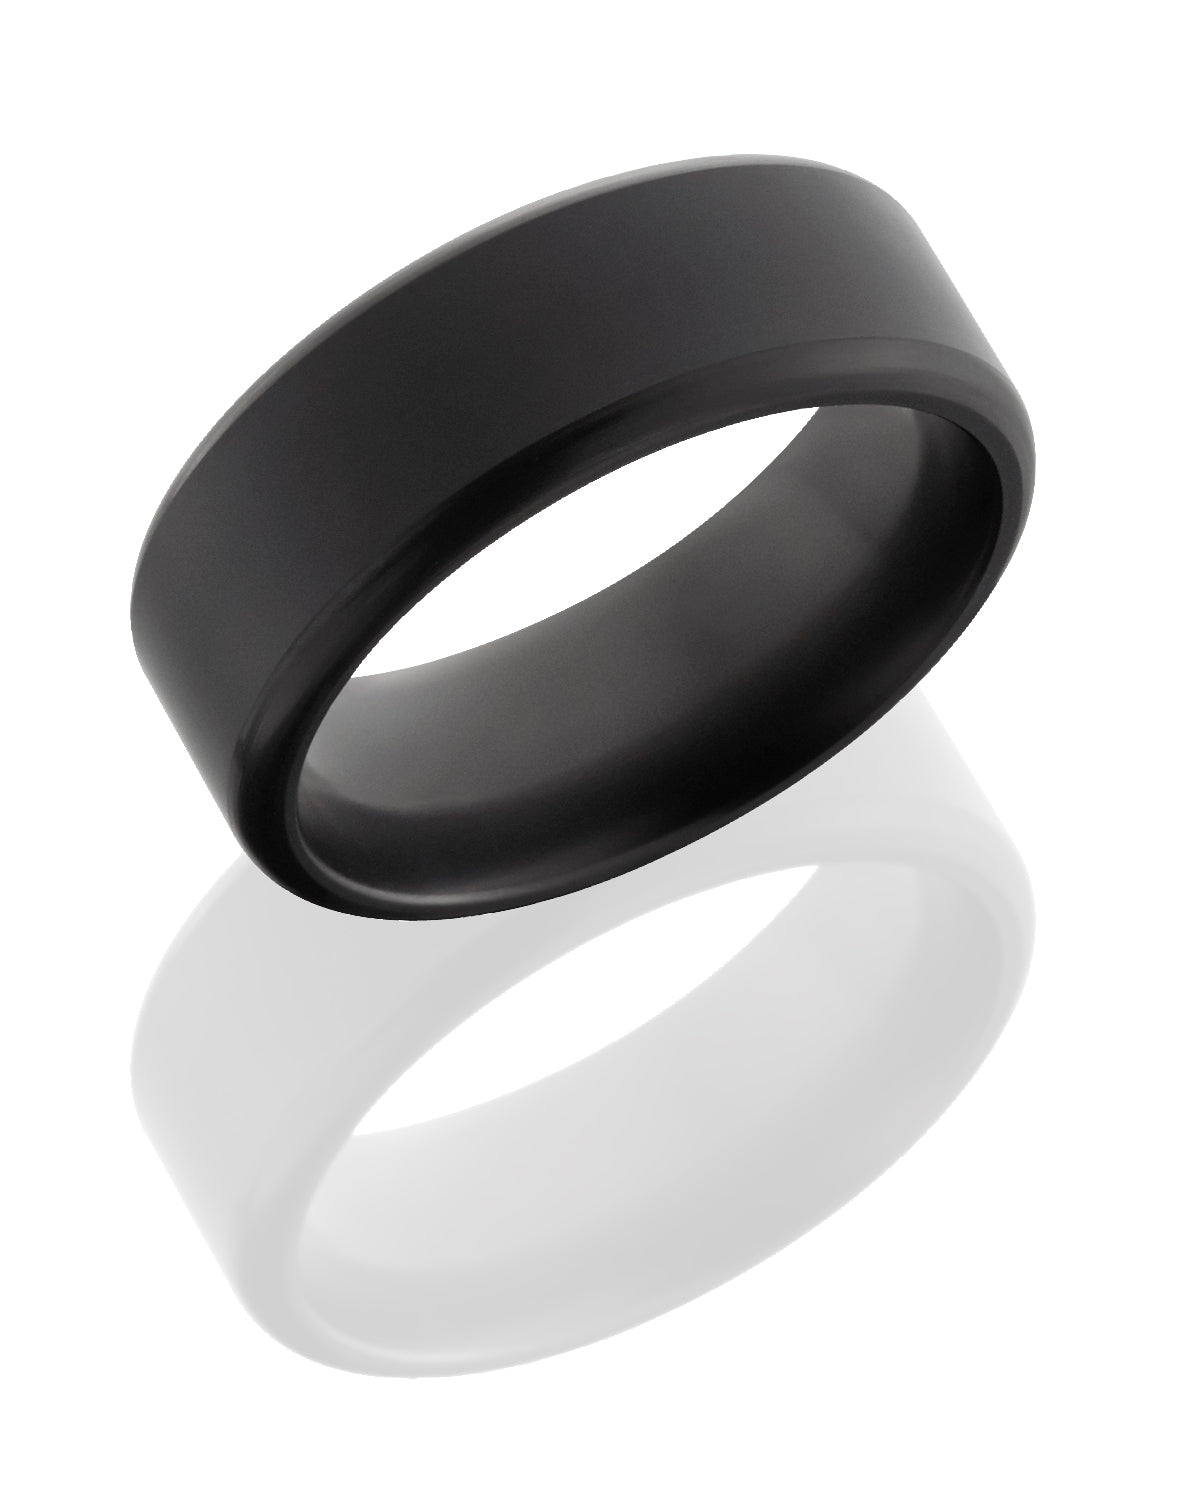 KRATOS ROUNDED MATTE MENS BAND SIZE 8.5